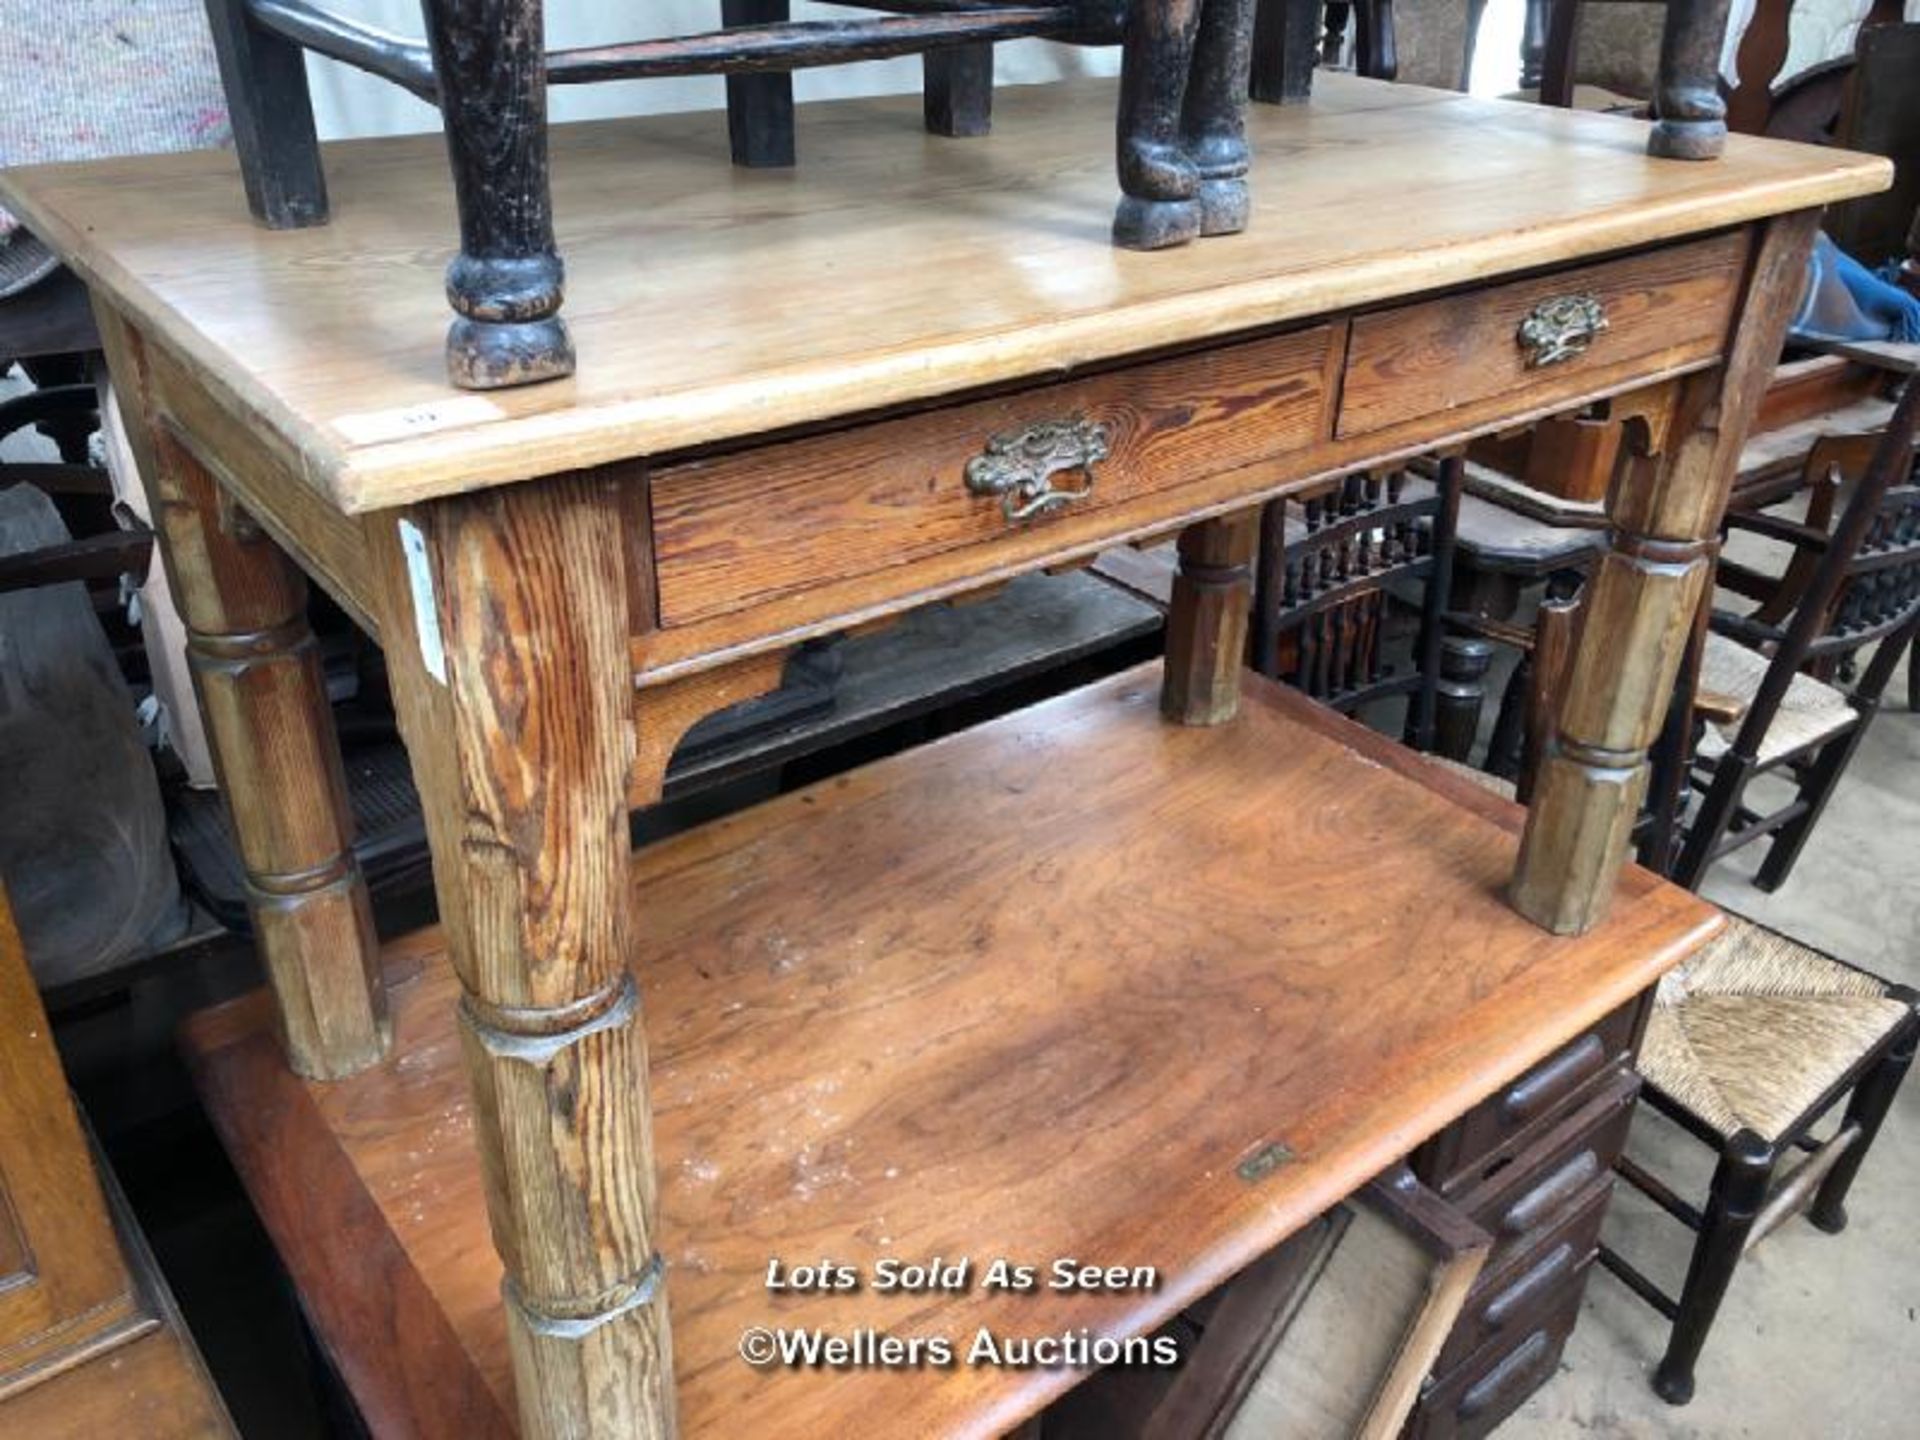 PINE TABLE WITH TWO DRAWERS AND BRASS HANDLES, 51 X 27 X 31 INCHES / LOCATED AT VICTORIA ANTIQUES,